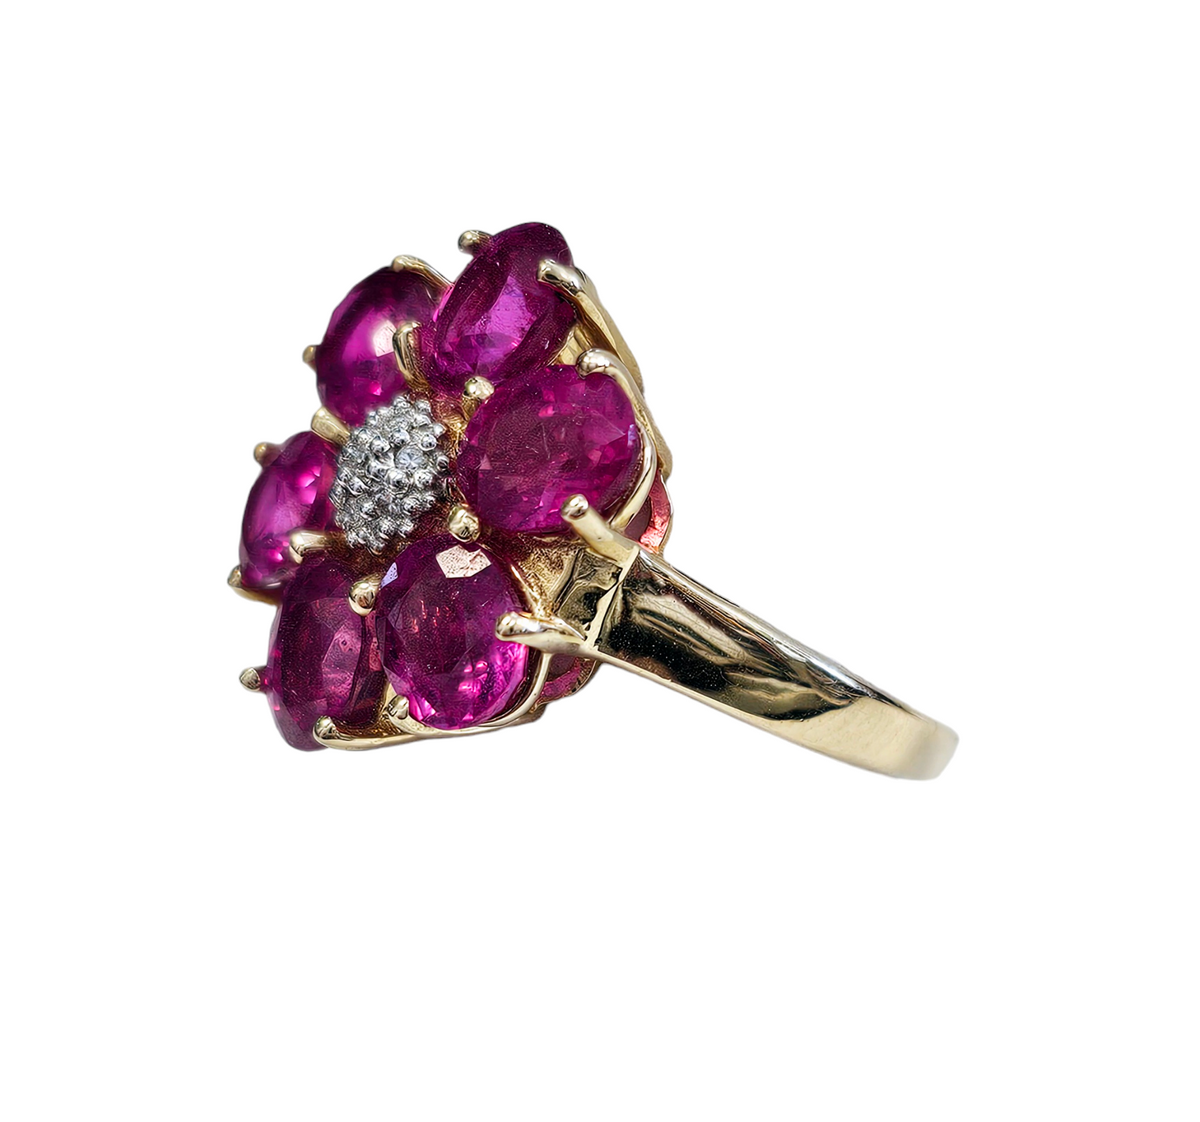 Diamond and Synthetic Oval Ruby Floral Design Ring made in 14-Karat Yellow Gold